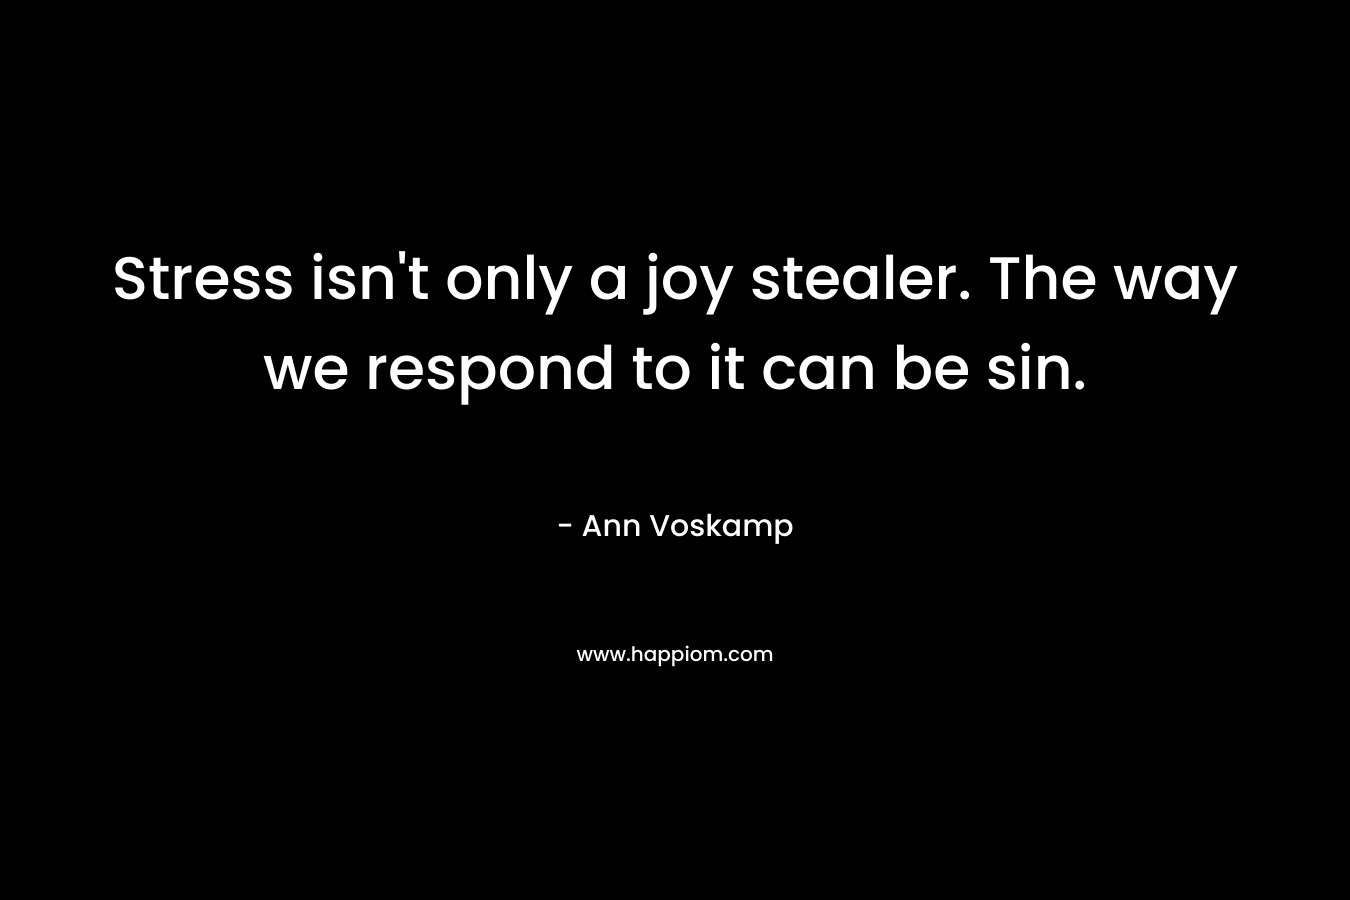 Stress isn't only a joy stealer. The way we respond to it can be sin.